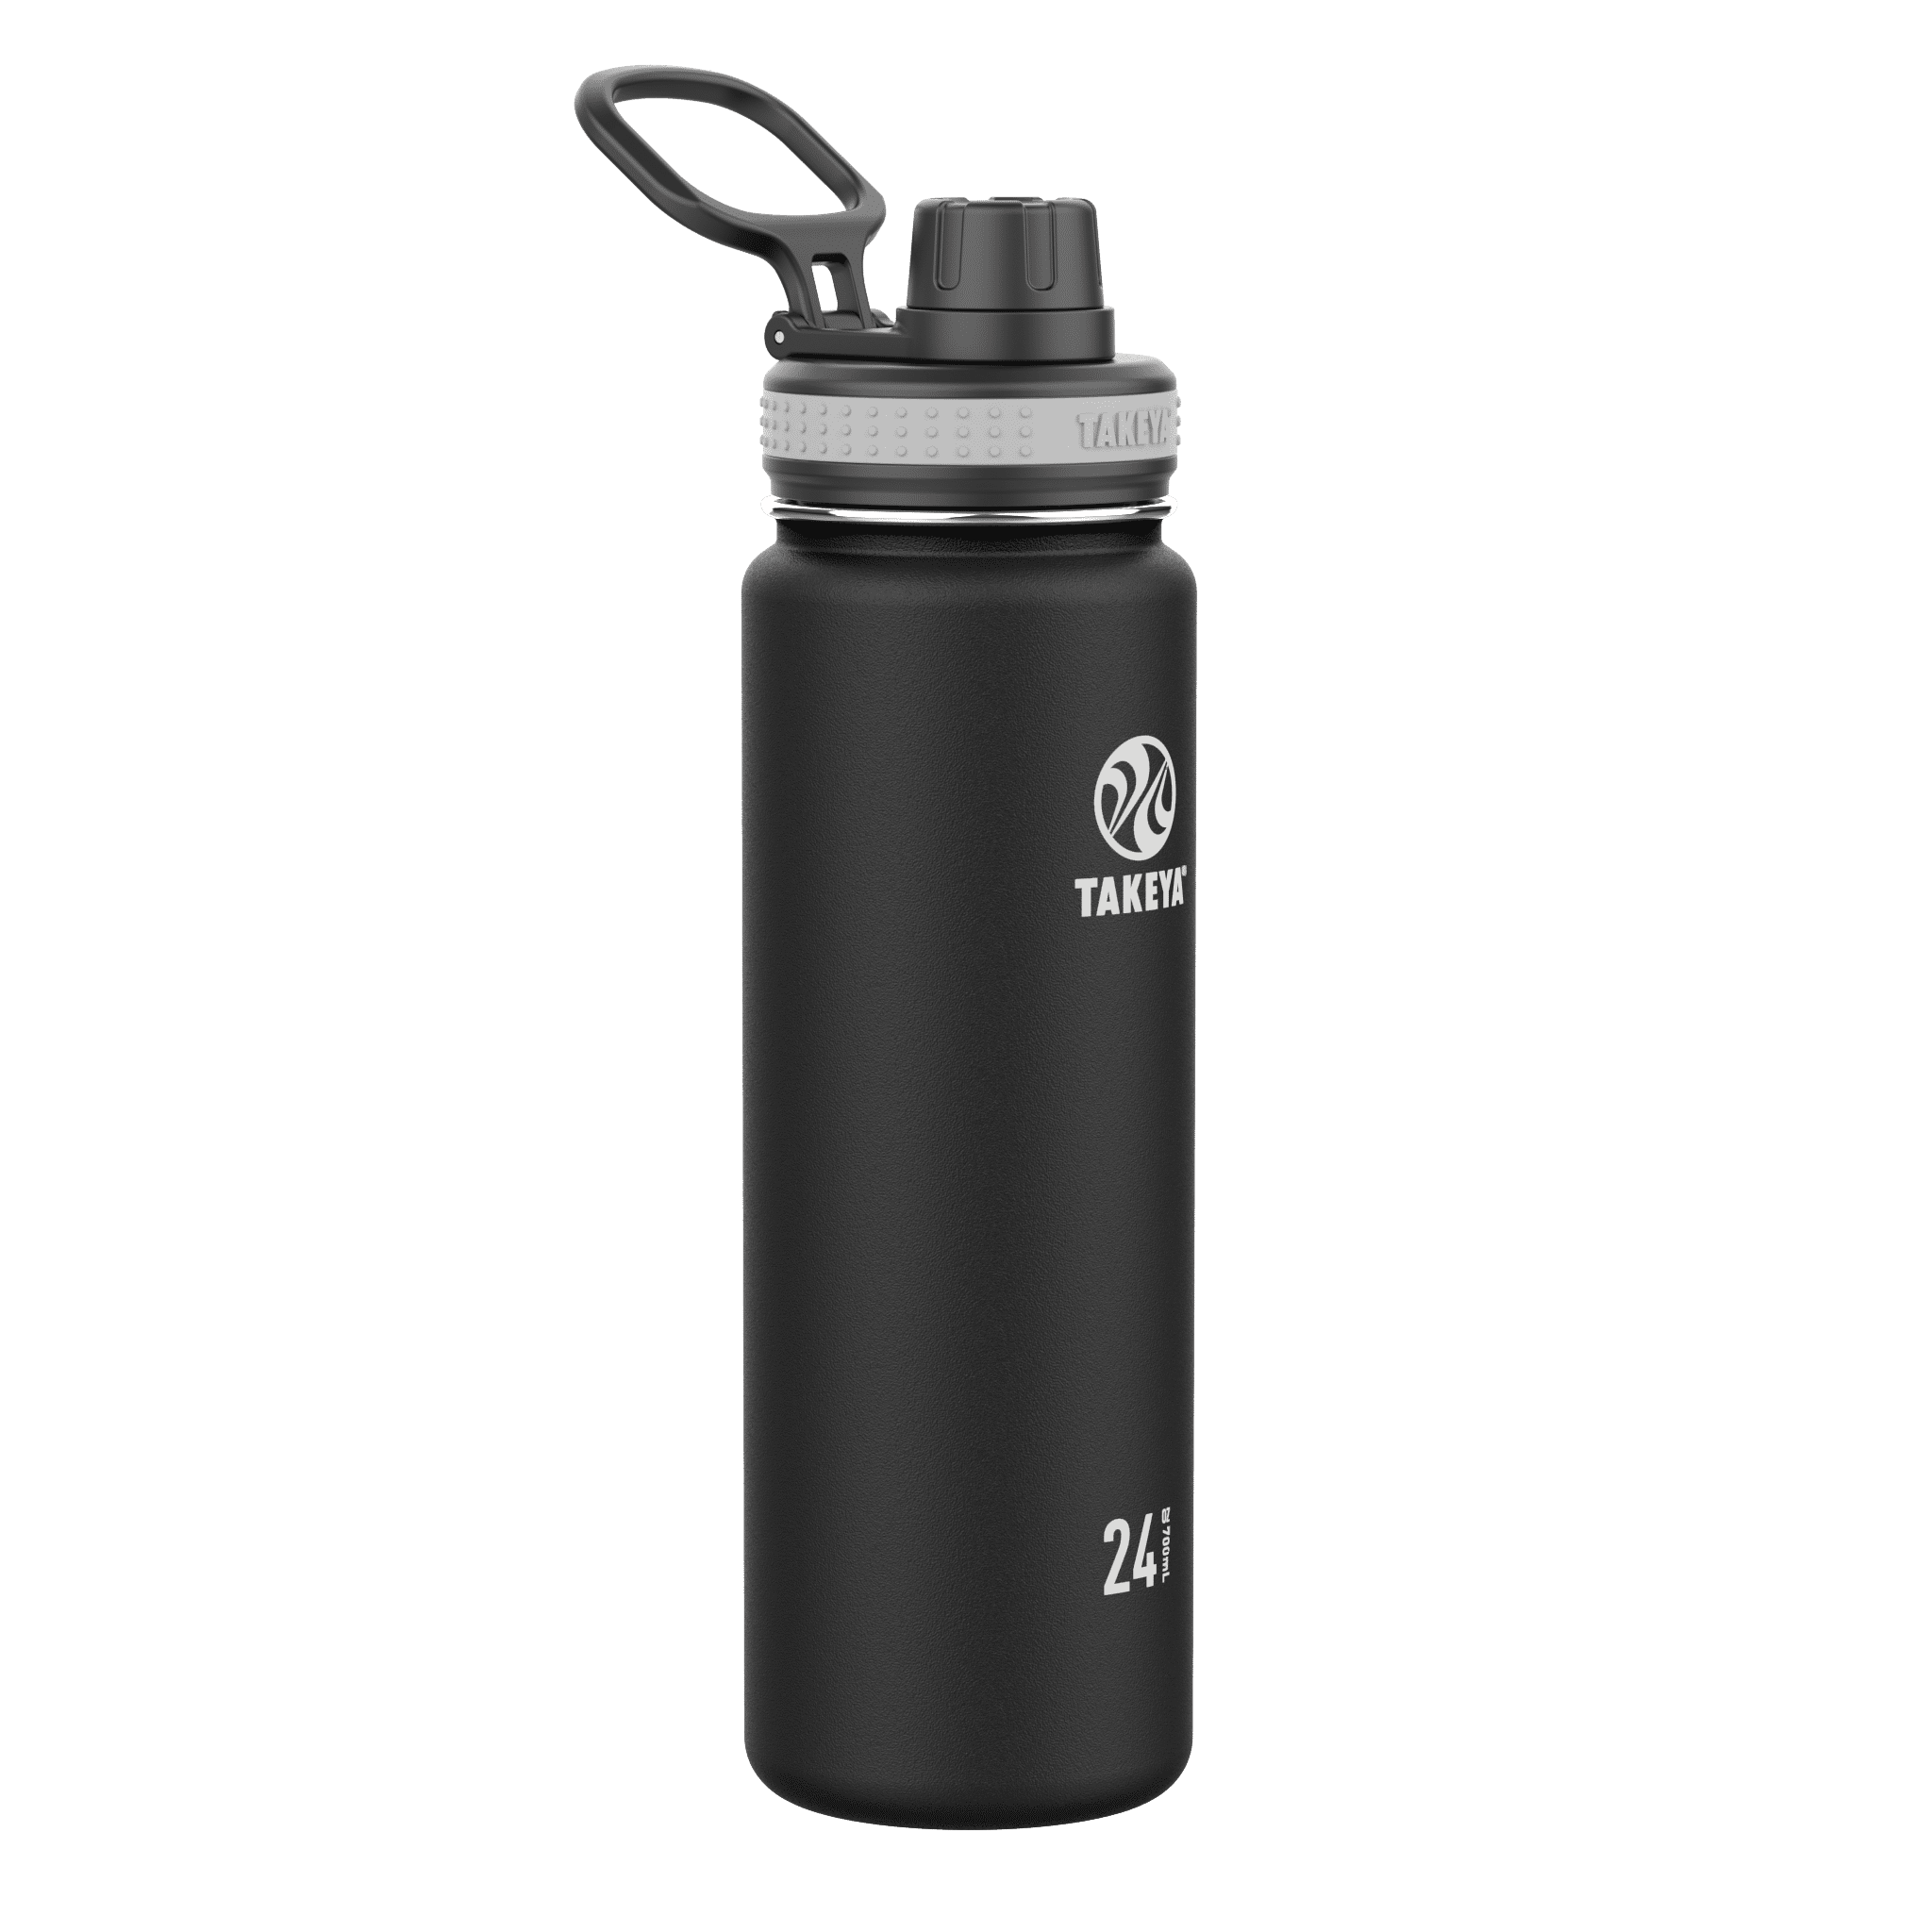 Takeya ThermoFlask Stainless Steel Water Bottle 24oz 2-pack NEW SHIP FROM STORE 